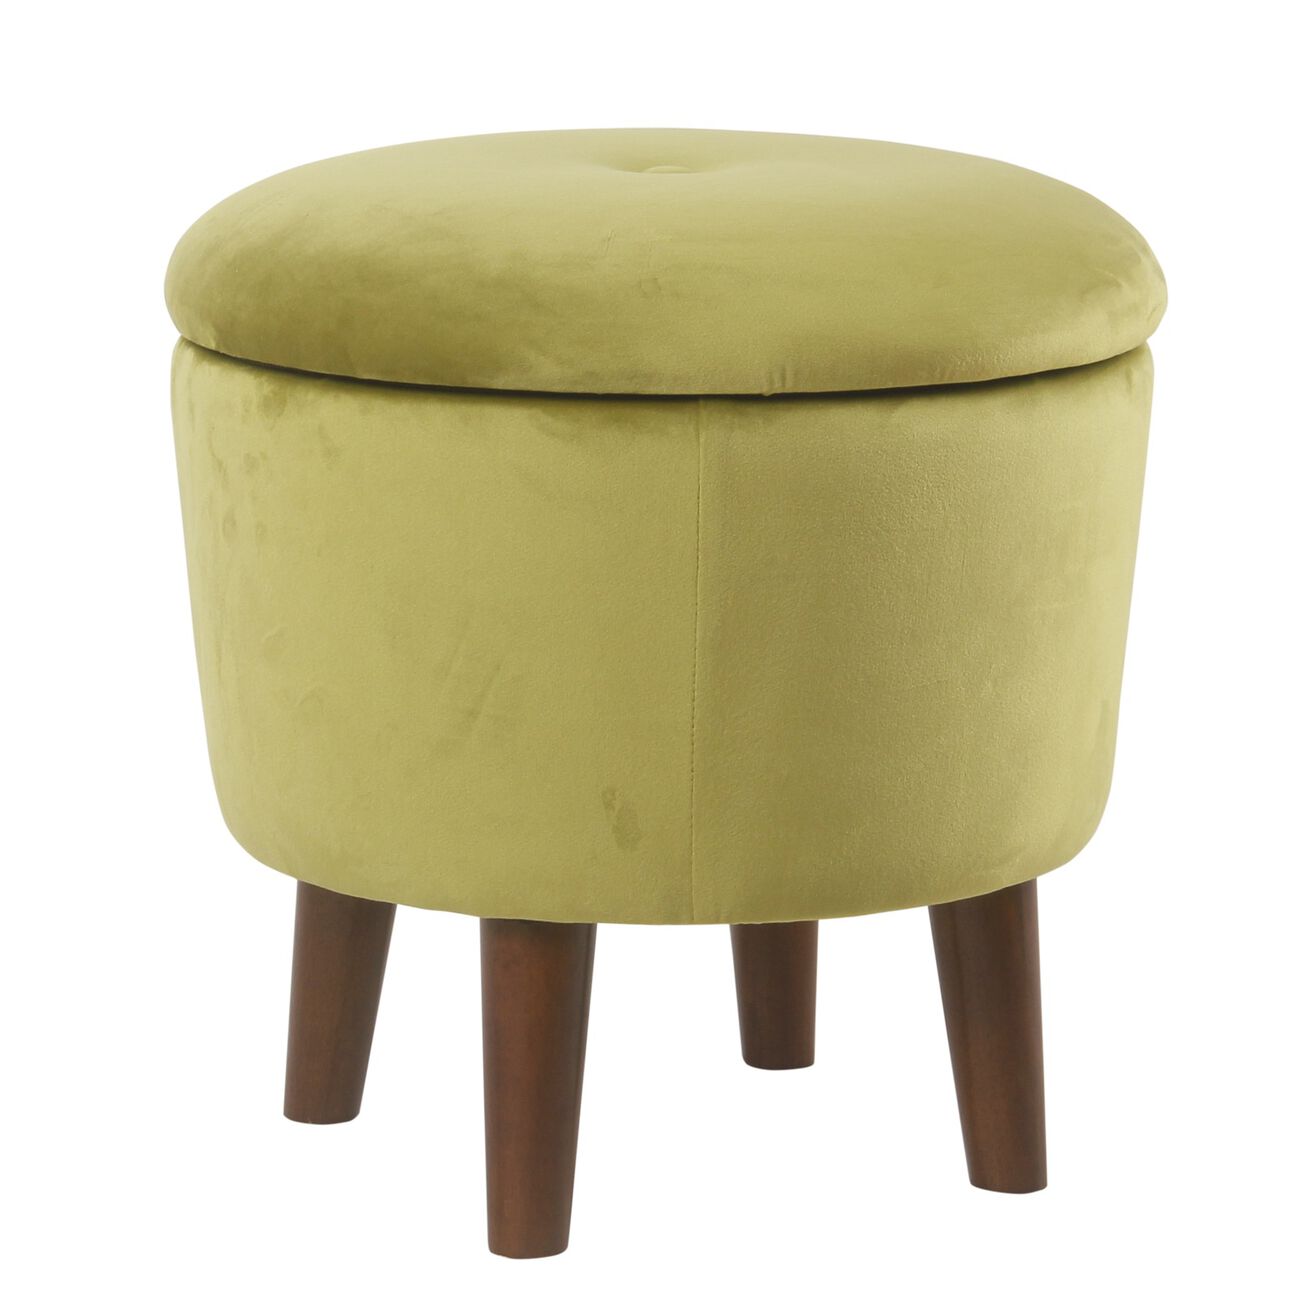 Velvet Upholstered Tufted Ottoman with Tapered Legs and Hidden Storage, Green and Brown